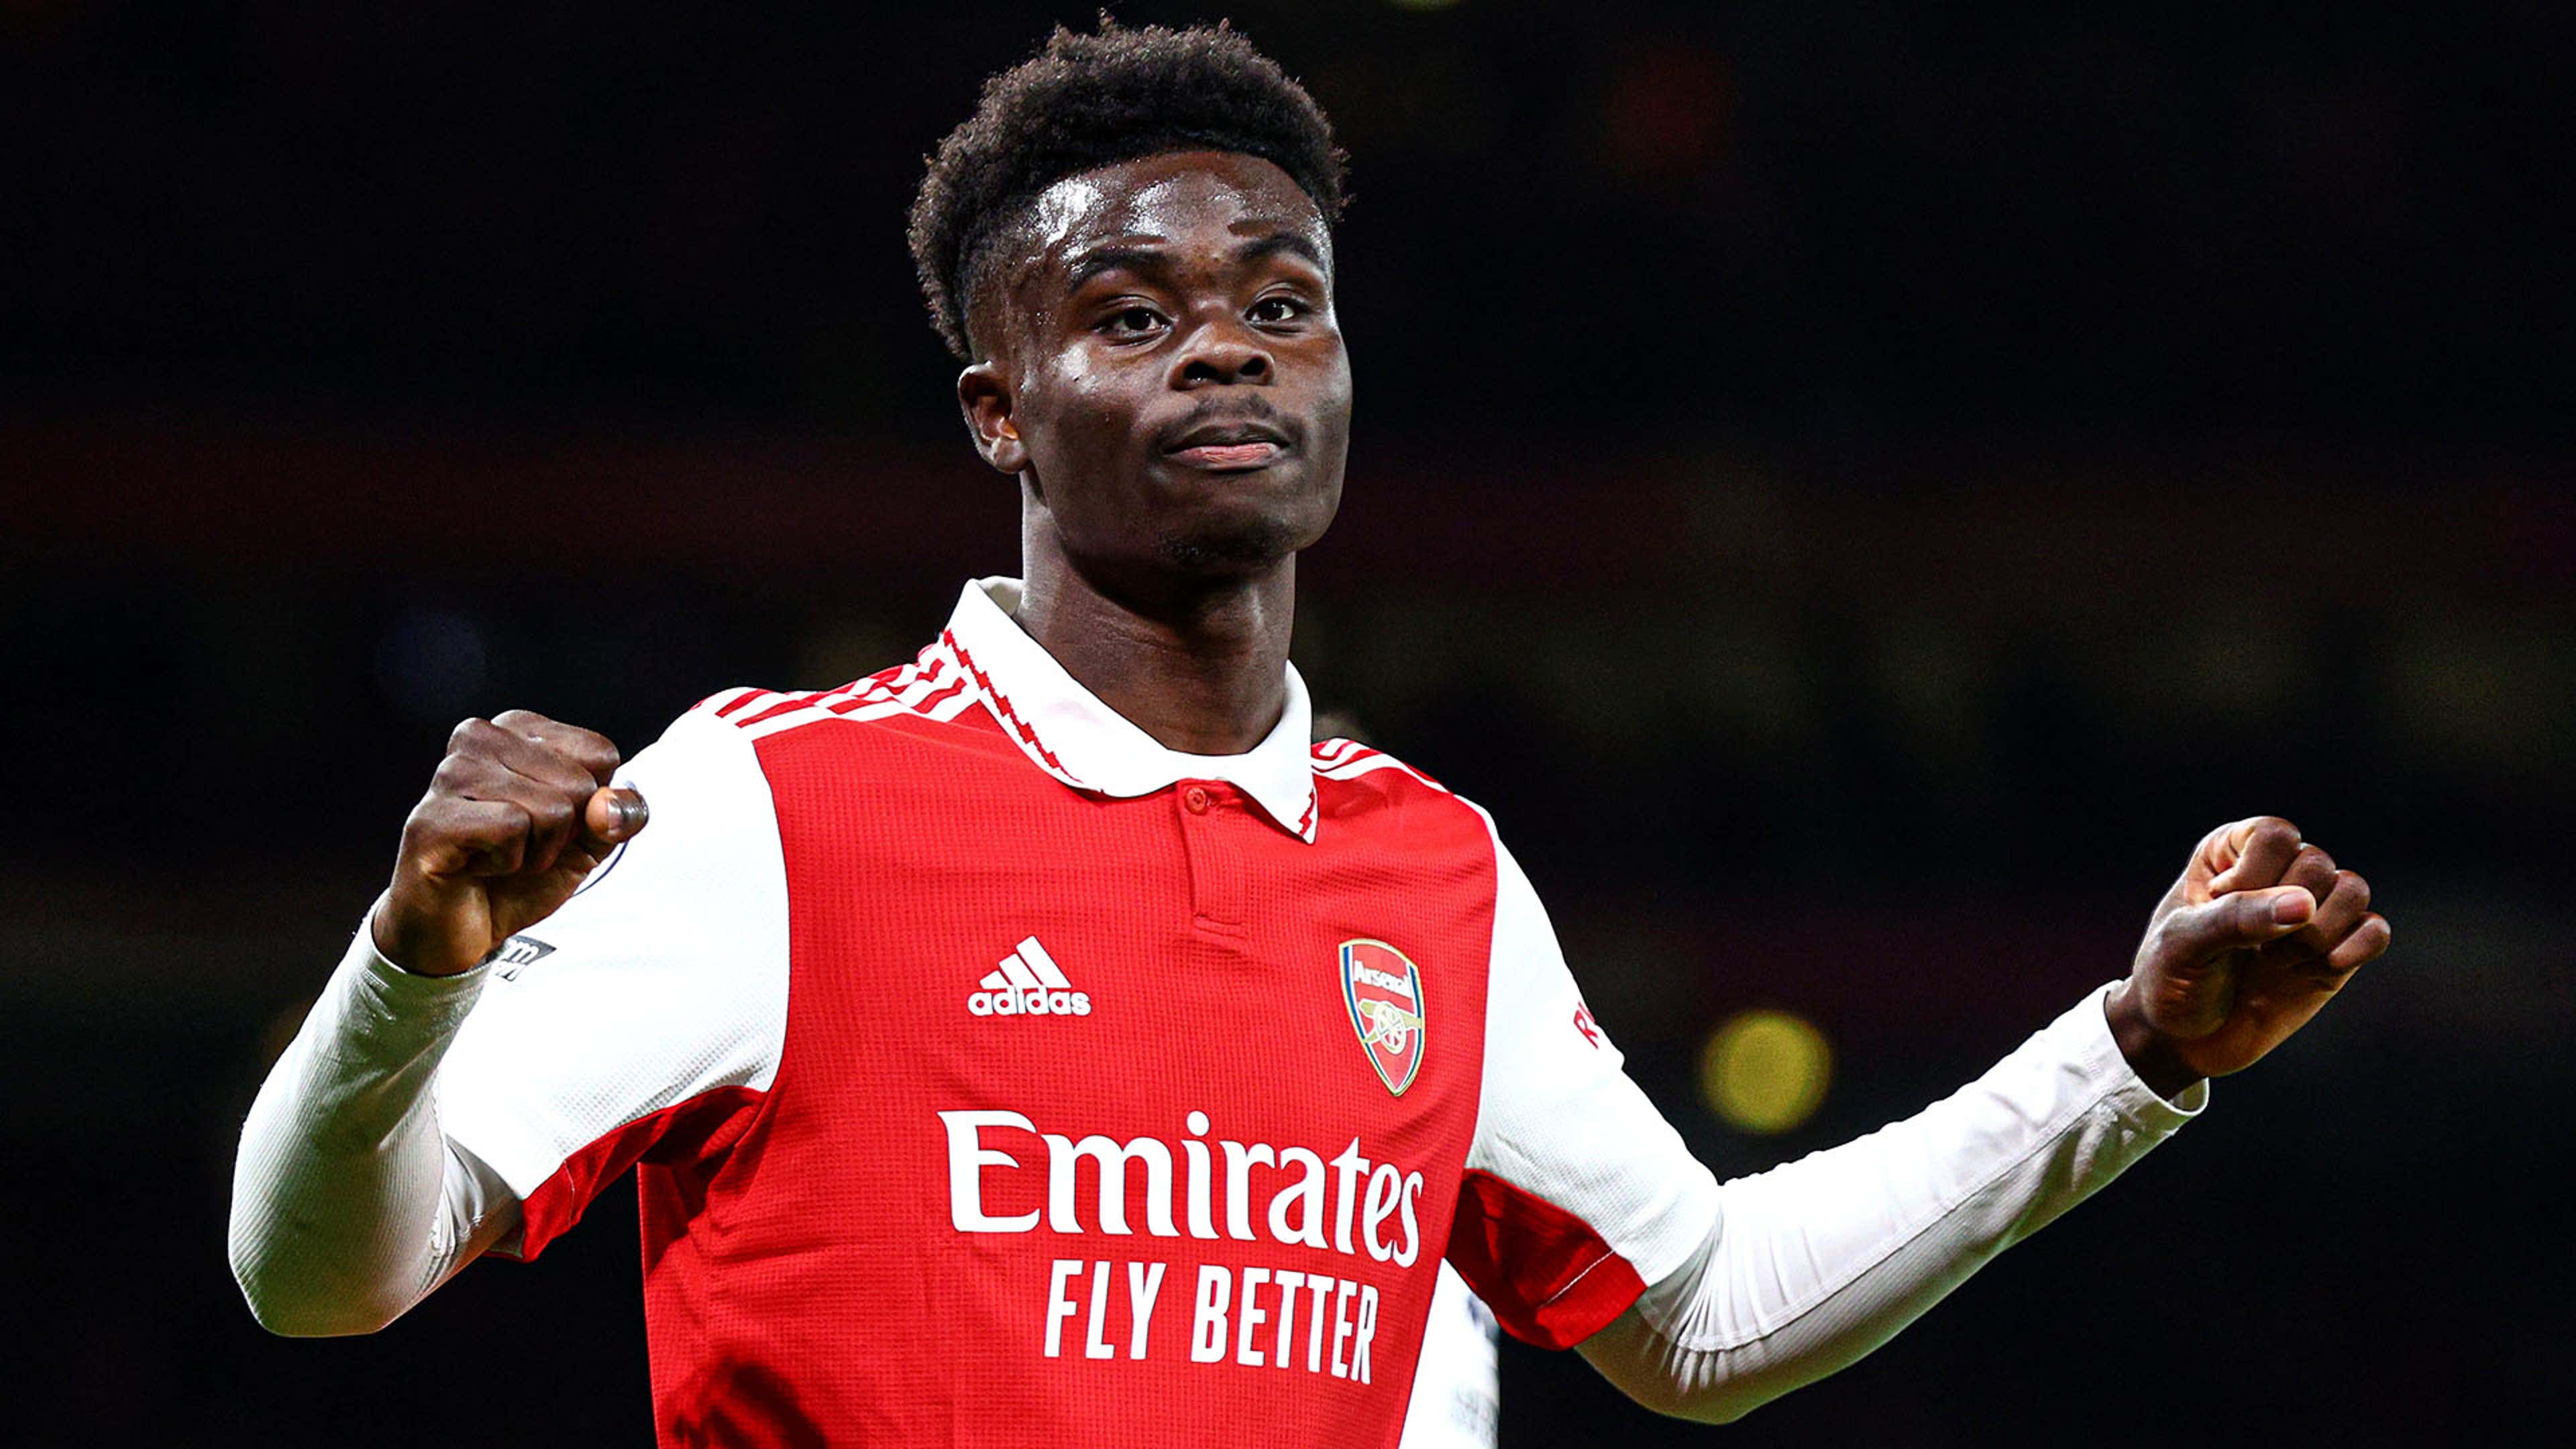 WATCH: No stopping that! Bukayo Saka blasts Arsenal into the lead against Everton with fine goal | Goal.com Australia